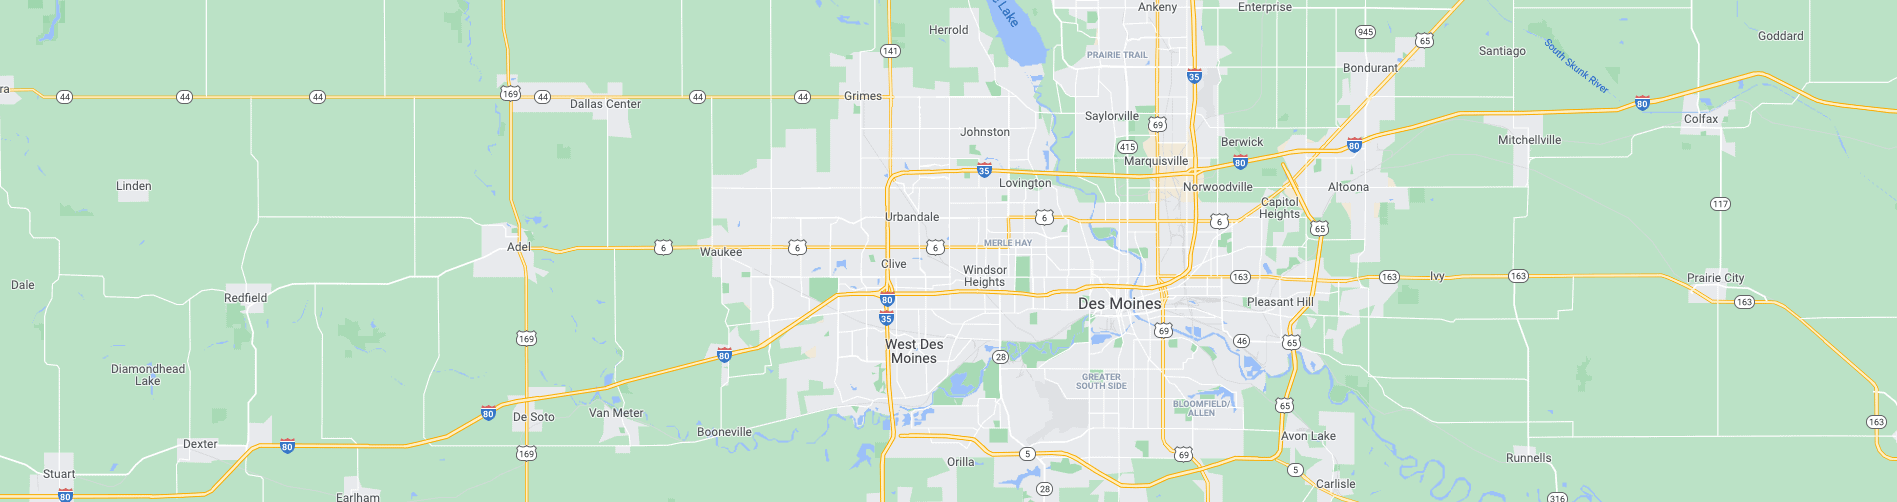 Google map Des Moines and Urbandale Iowa